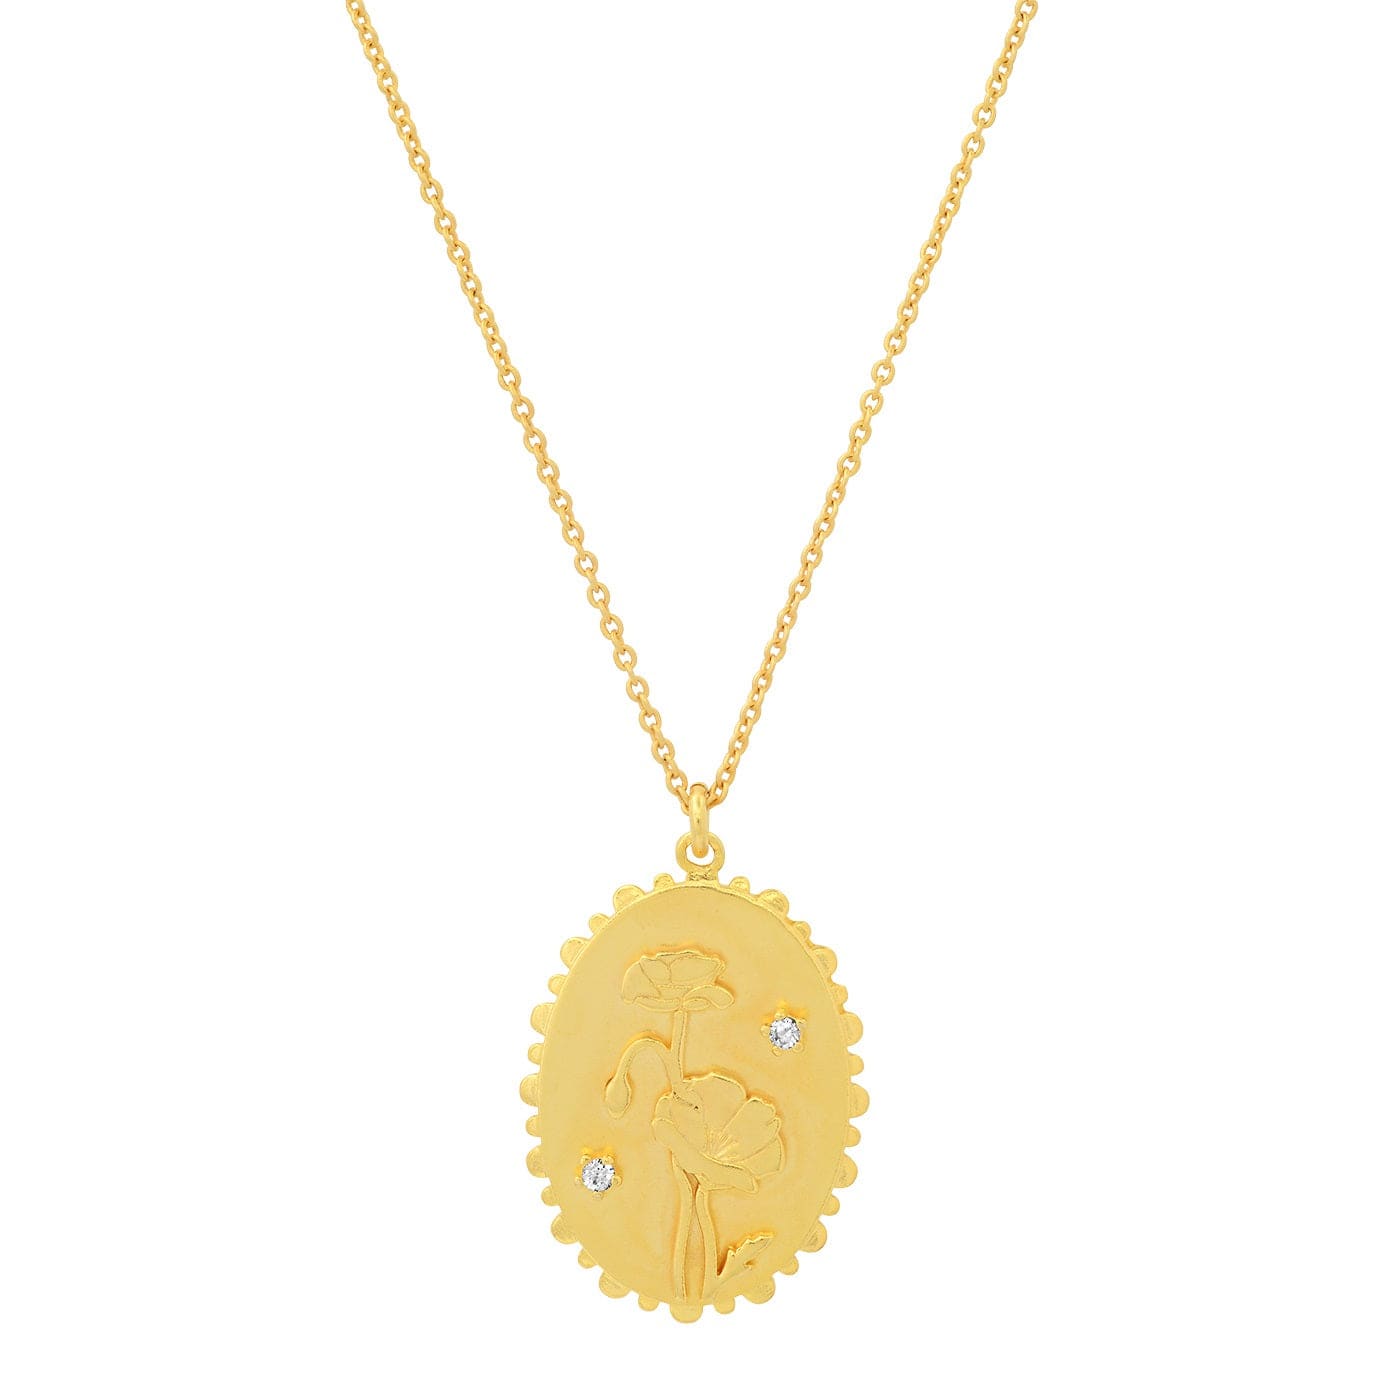 TAI JEWELRY Necklace Gold Flower Coin Pendant Necklace